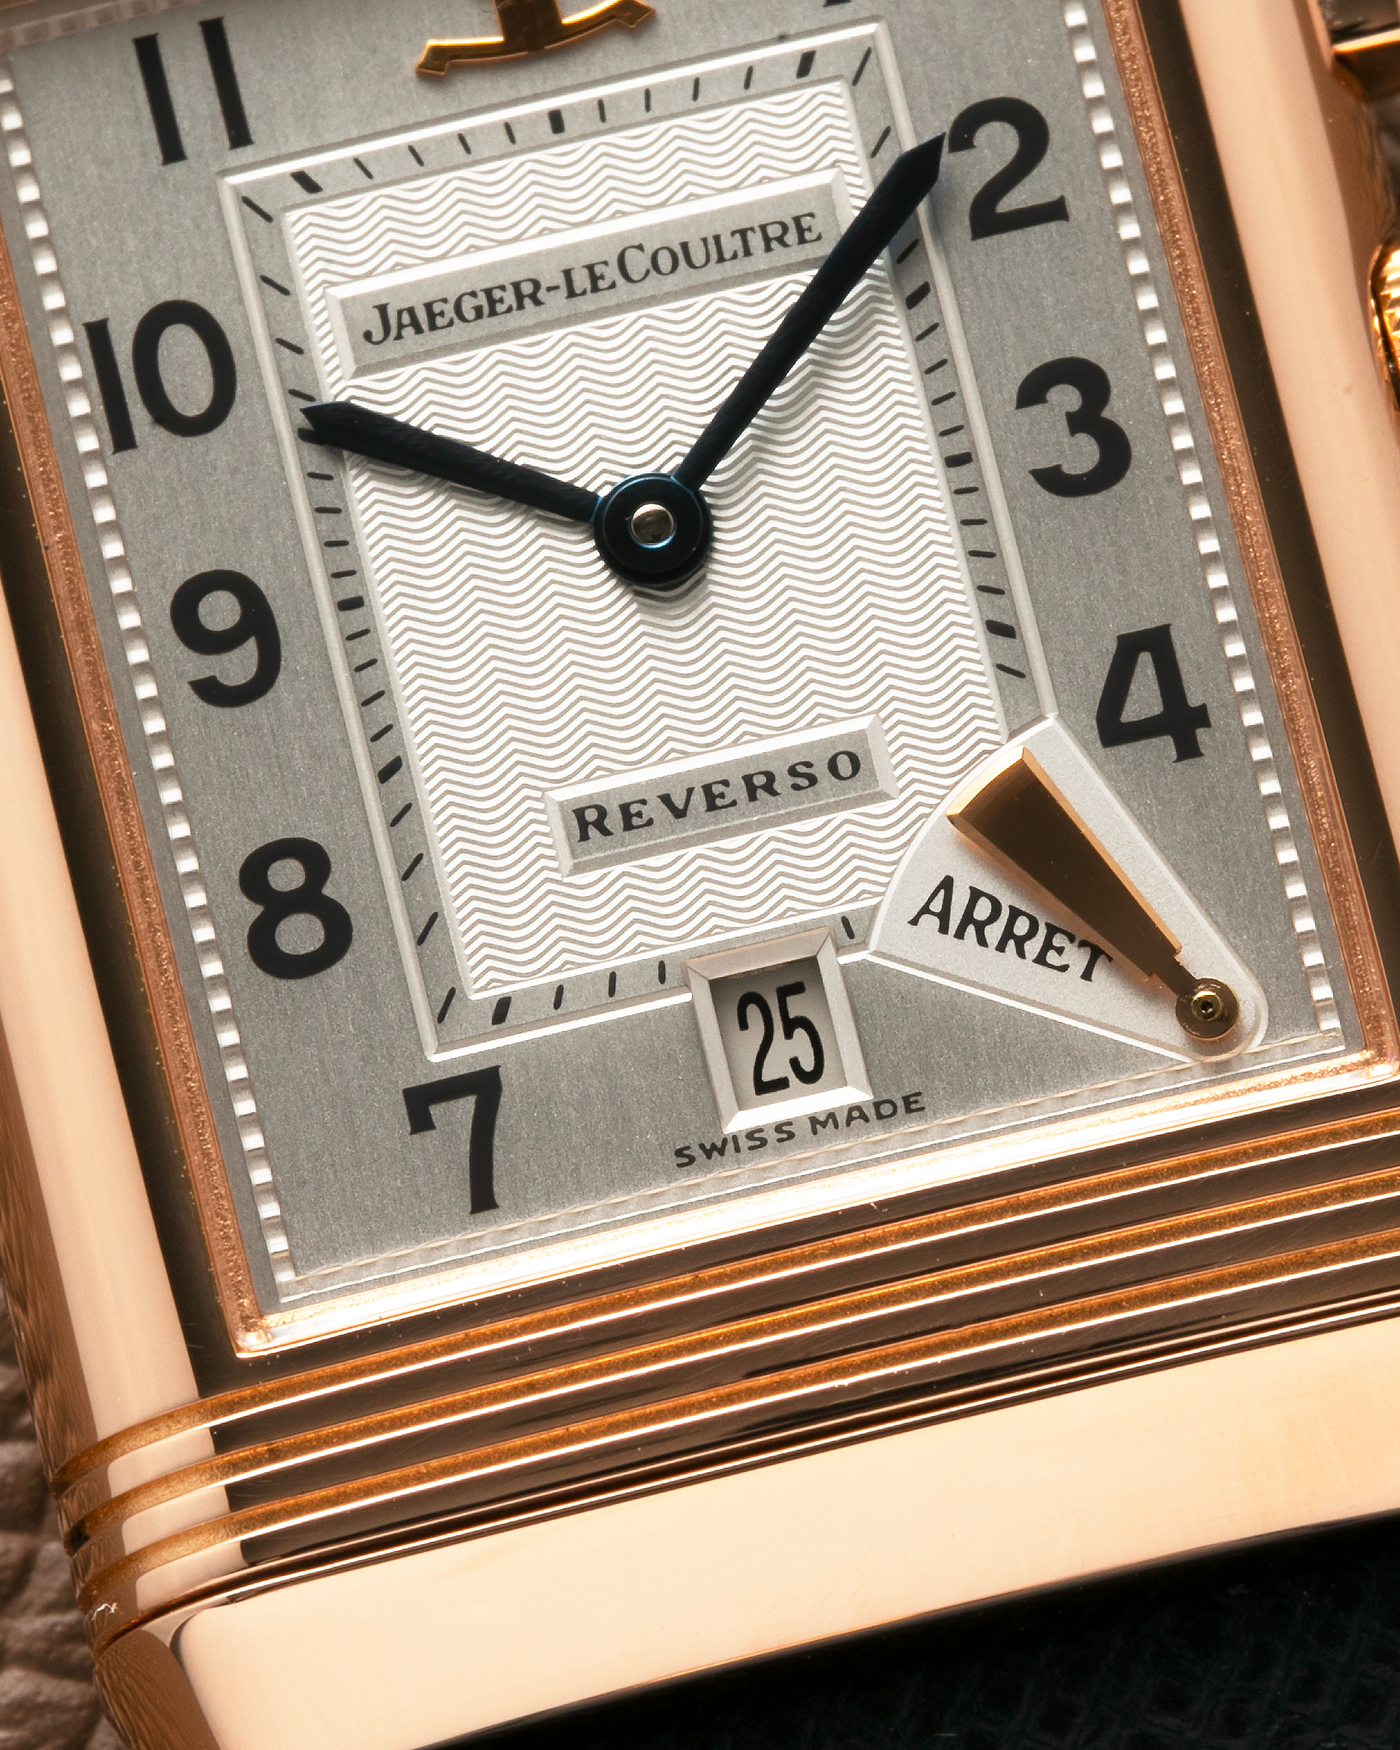 Brand: Jaeger LeCoultre Year: 1996 Model: Reverso Chronographe Retrograde, Limited to 500 pieces Reference: 270.2.69 Material: 18-carat Rose Gold Movement: JLC Cal. 829, Manual-Wind Case Diameter: 42mm x 26mm x 9.5mm Strap: Molequin Navy Blue Textured Calf with Signed 18-carat Rose Gold Deployant Clasp